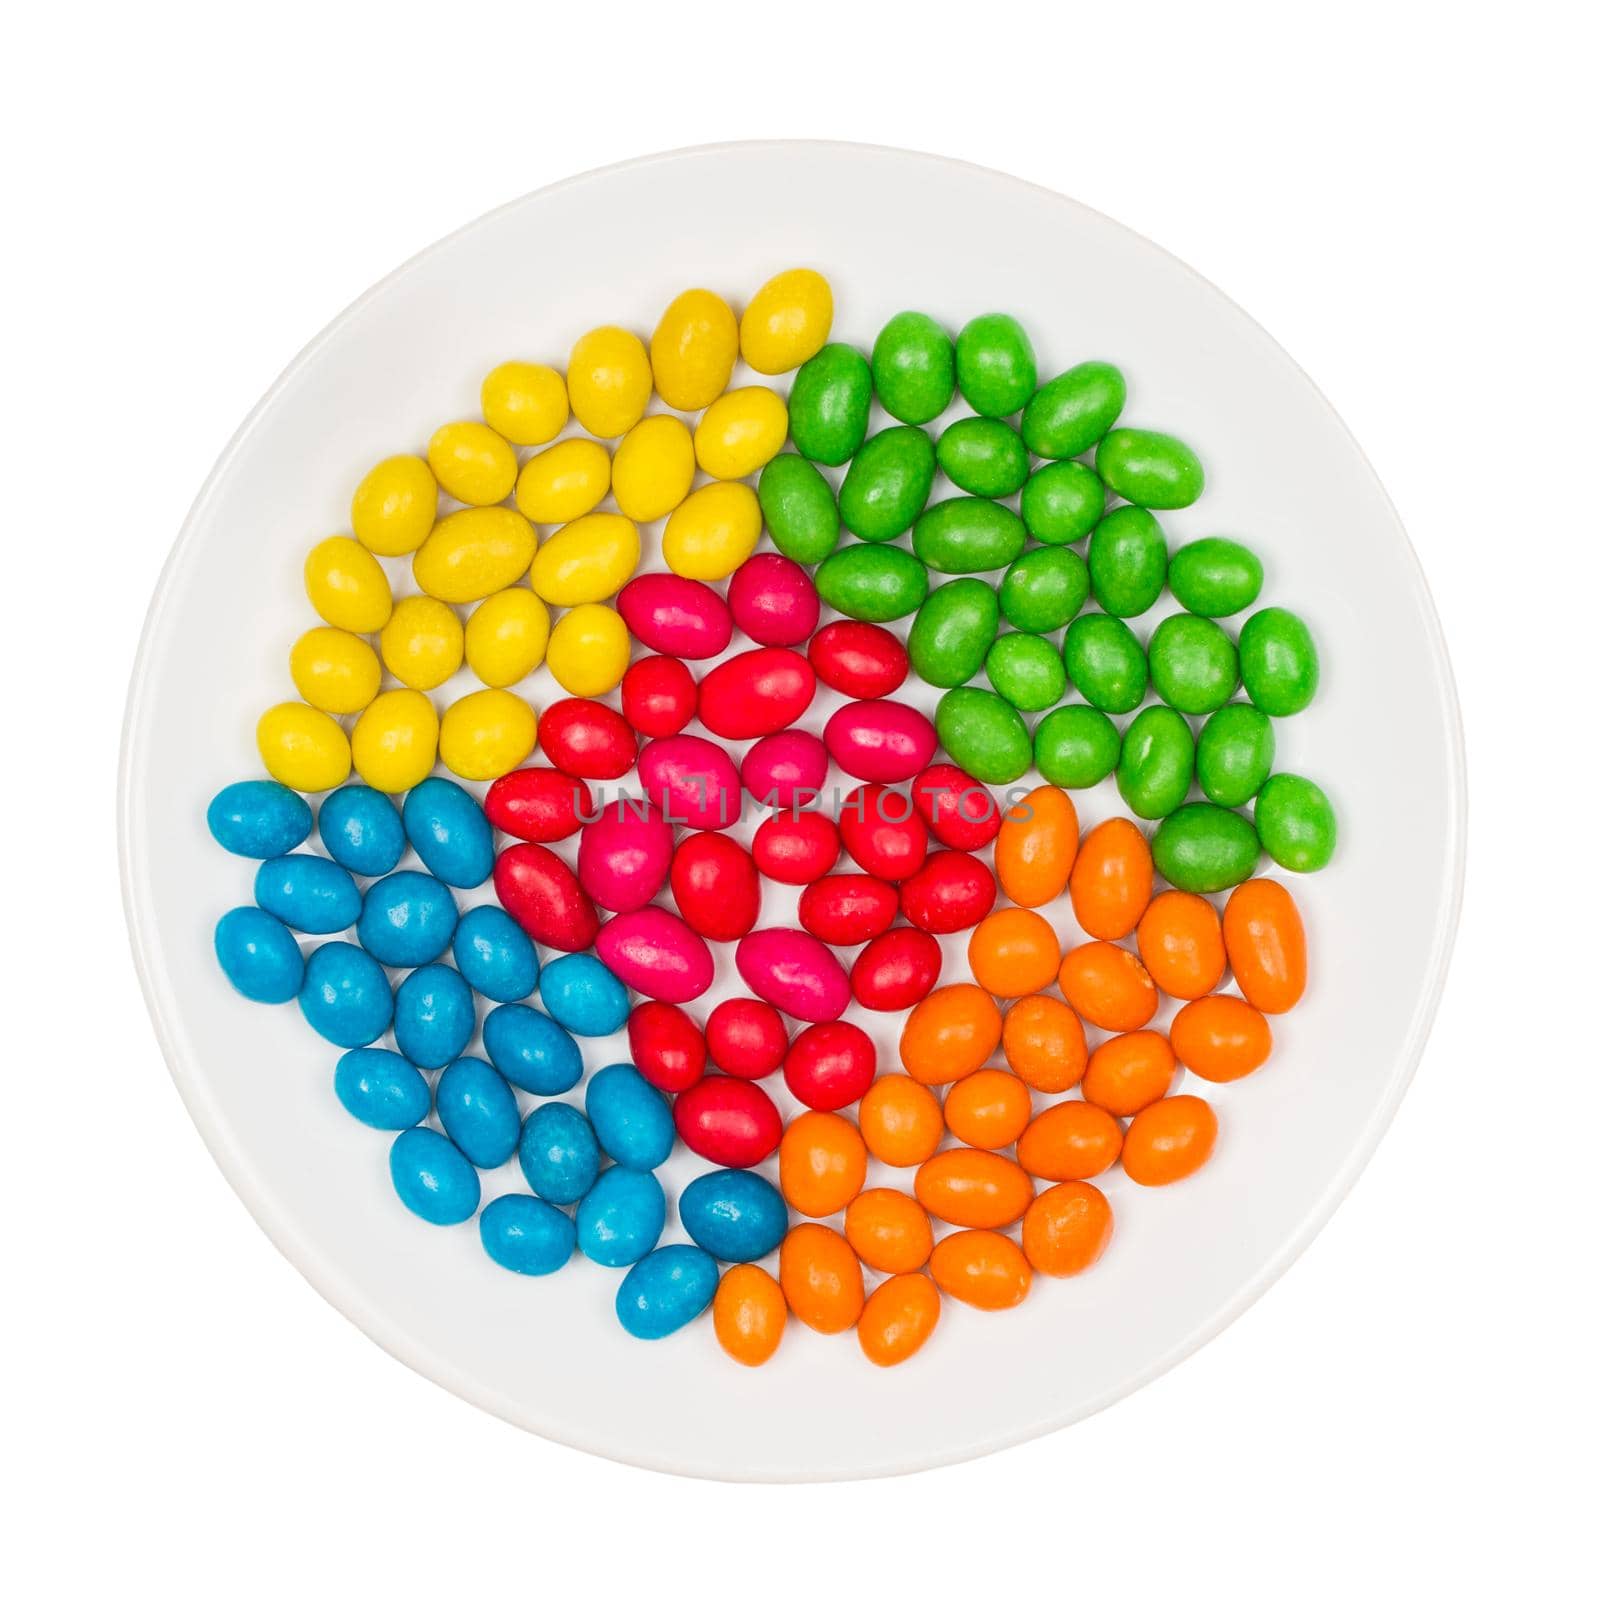 White plate full of sweet colorful candy isolated on a white background. Close-up of colorful candy